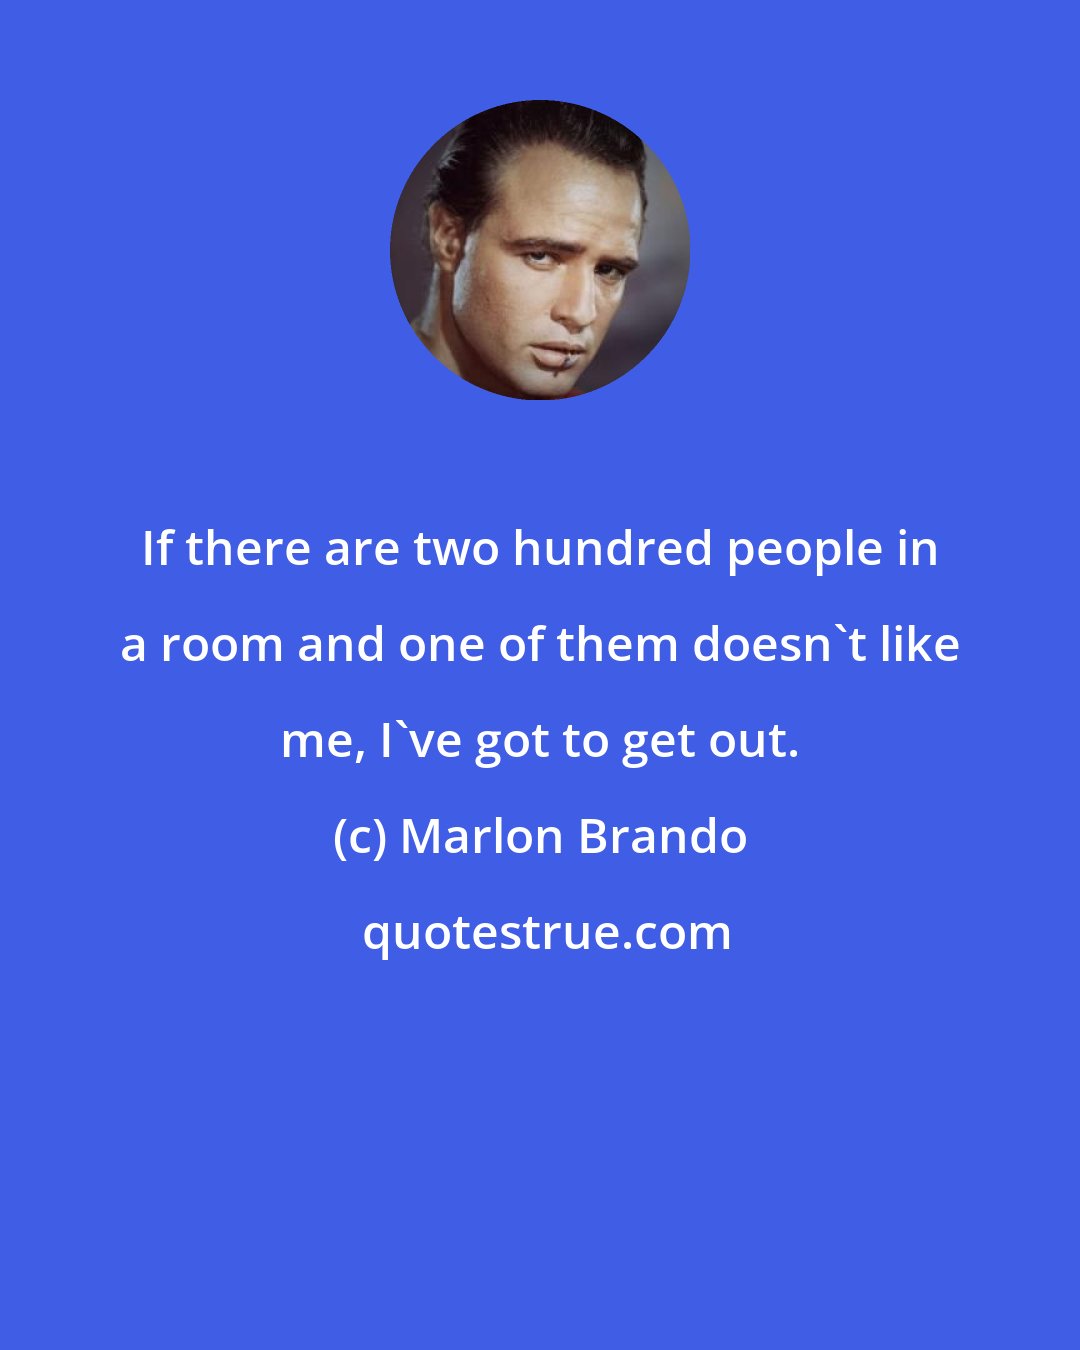 Marlon Brando: If there are two hundred people in a room and one of them doesn't like me, I've got to get out.